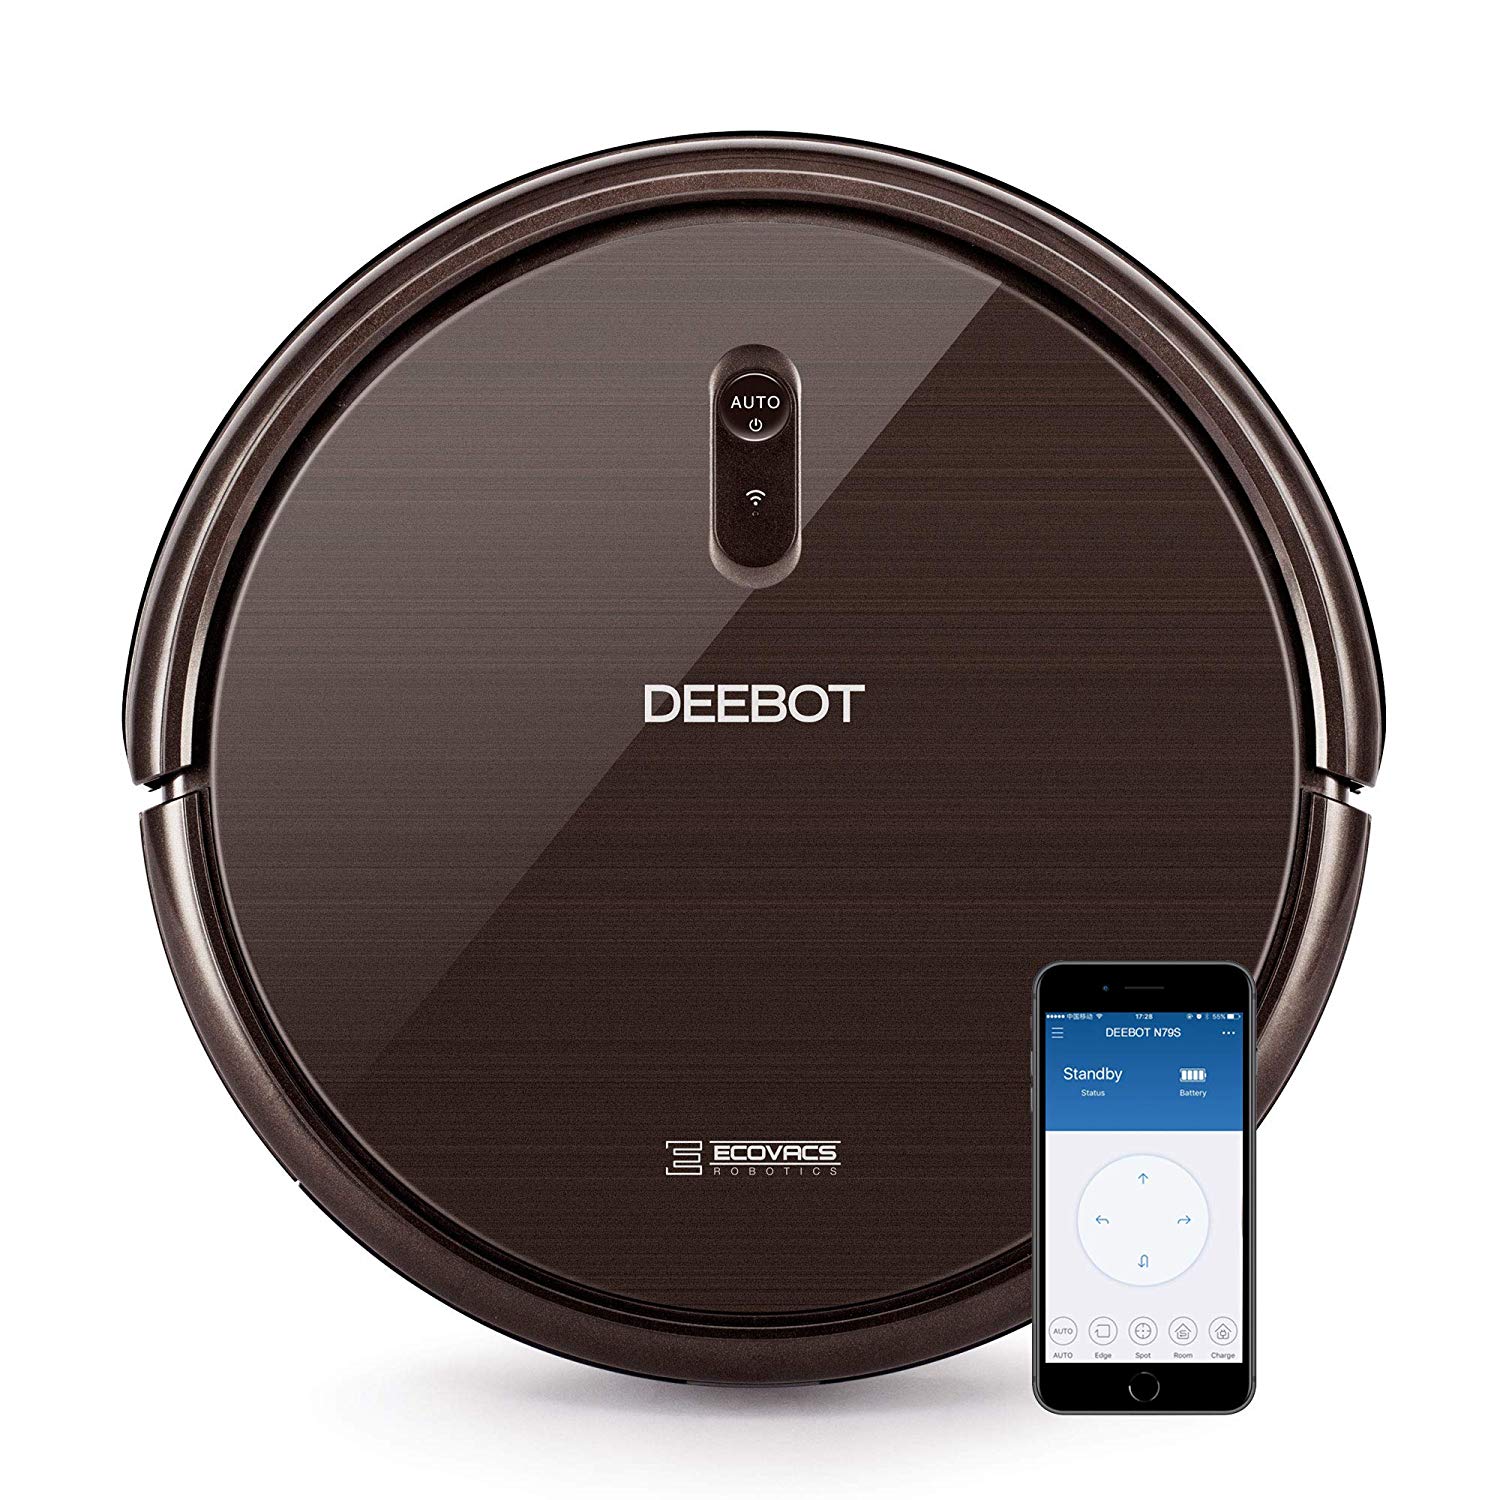 Ecovacs Deebot N79s Robot Vacuum Cleaner With Max Power Suction Alexa Connectivity App 